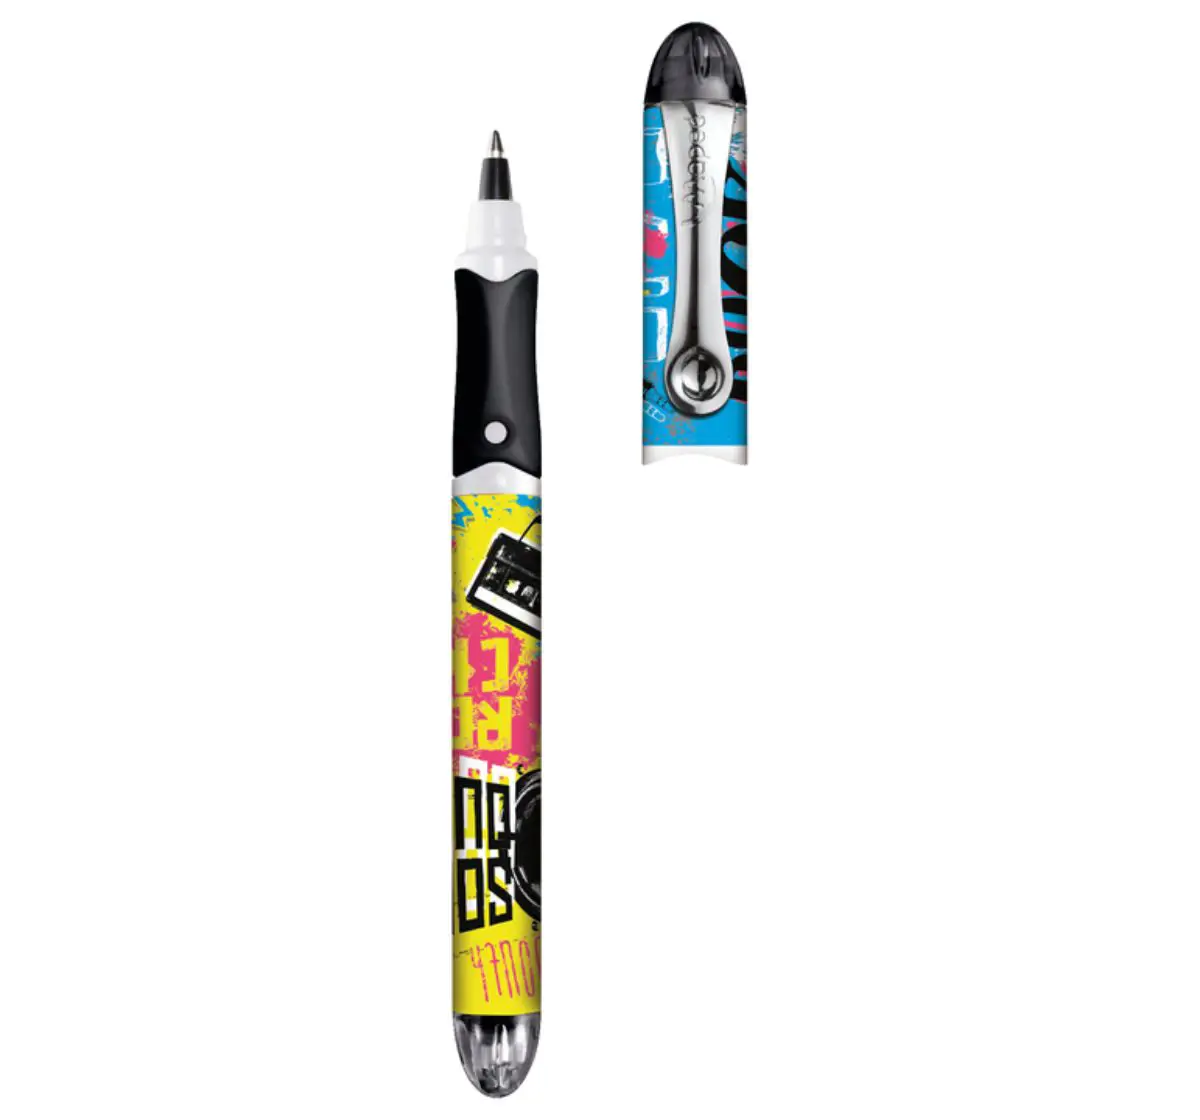 Maped Refillable Roller Pens - Set of 2,, 7Y+ (Multicolour)